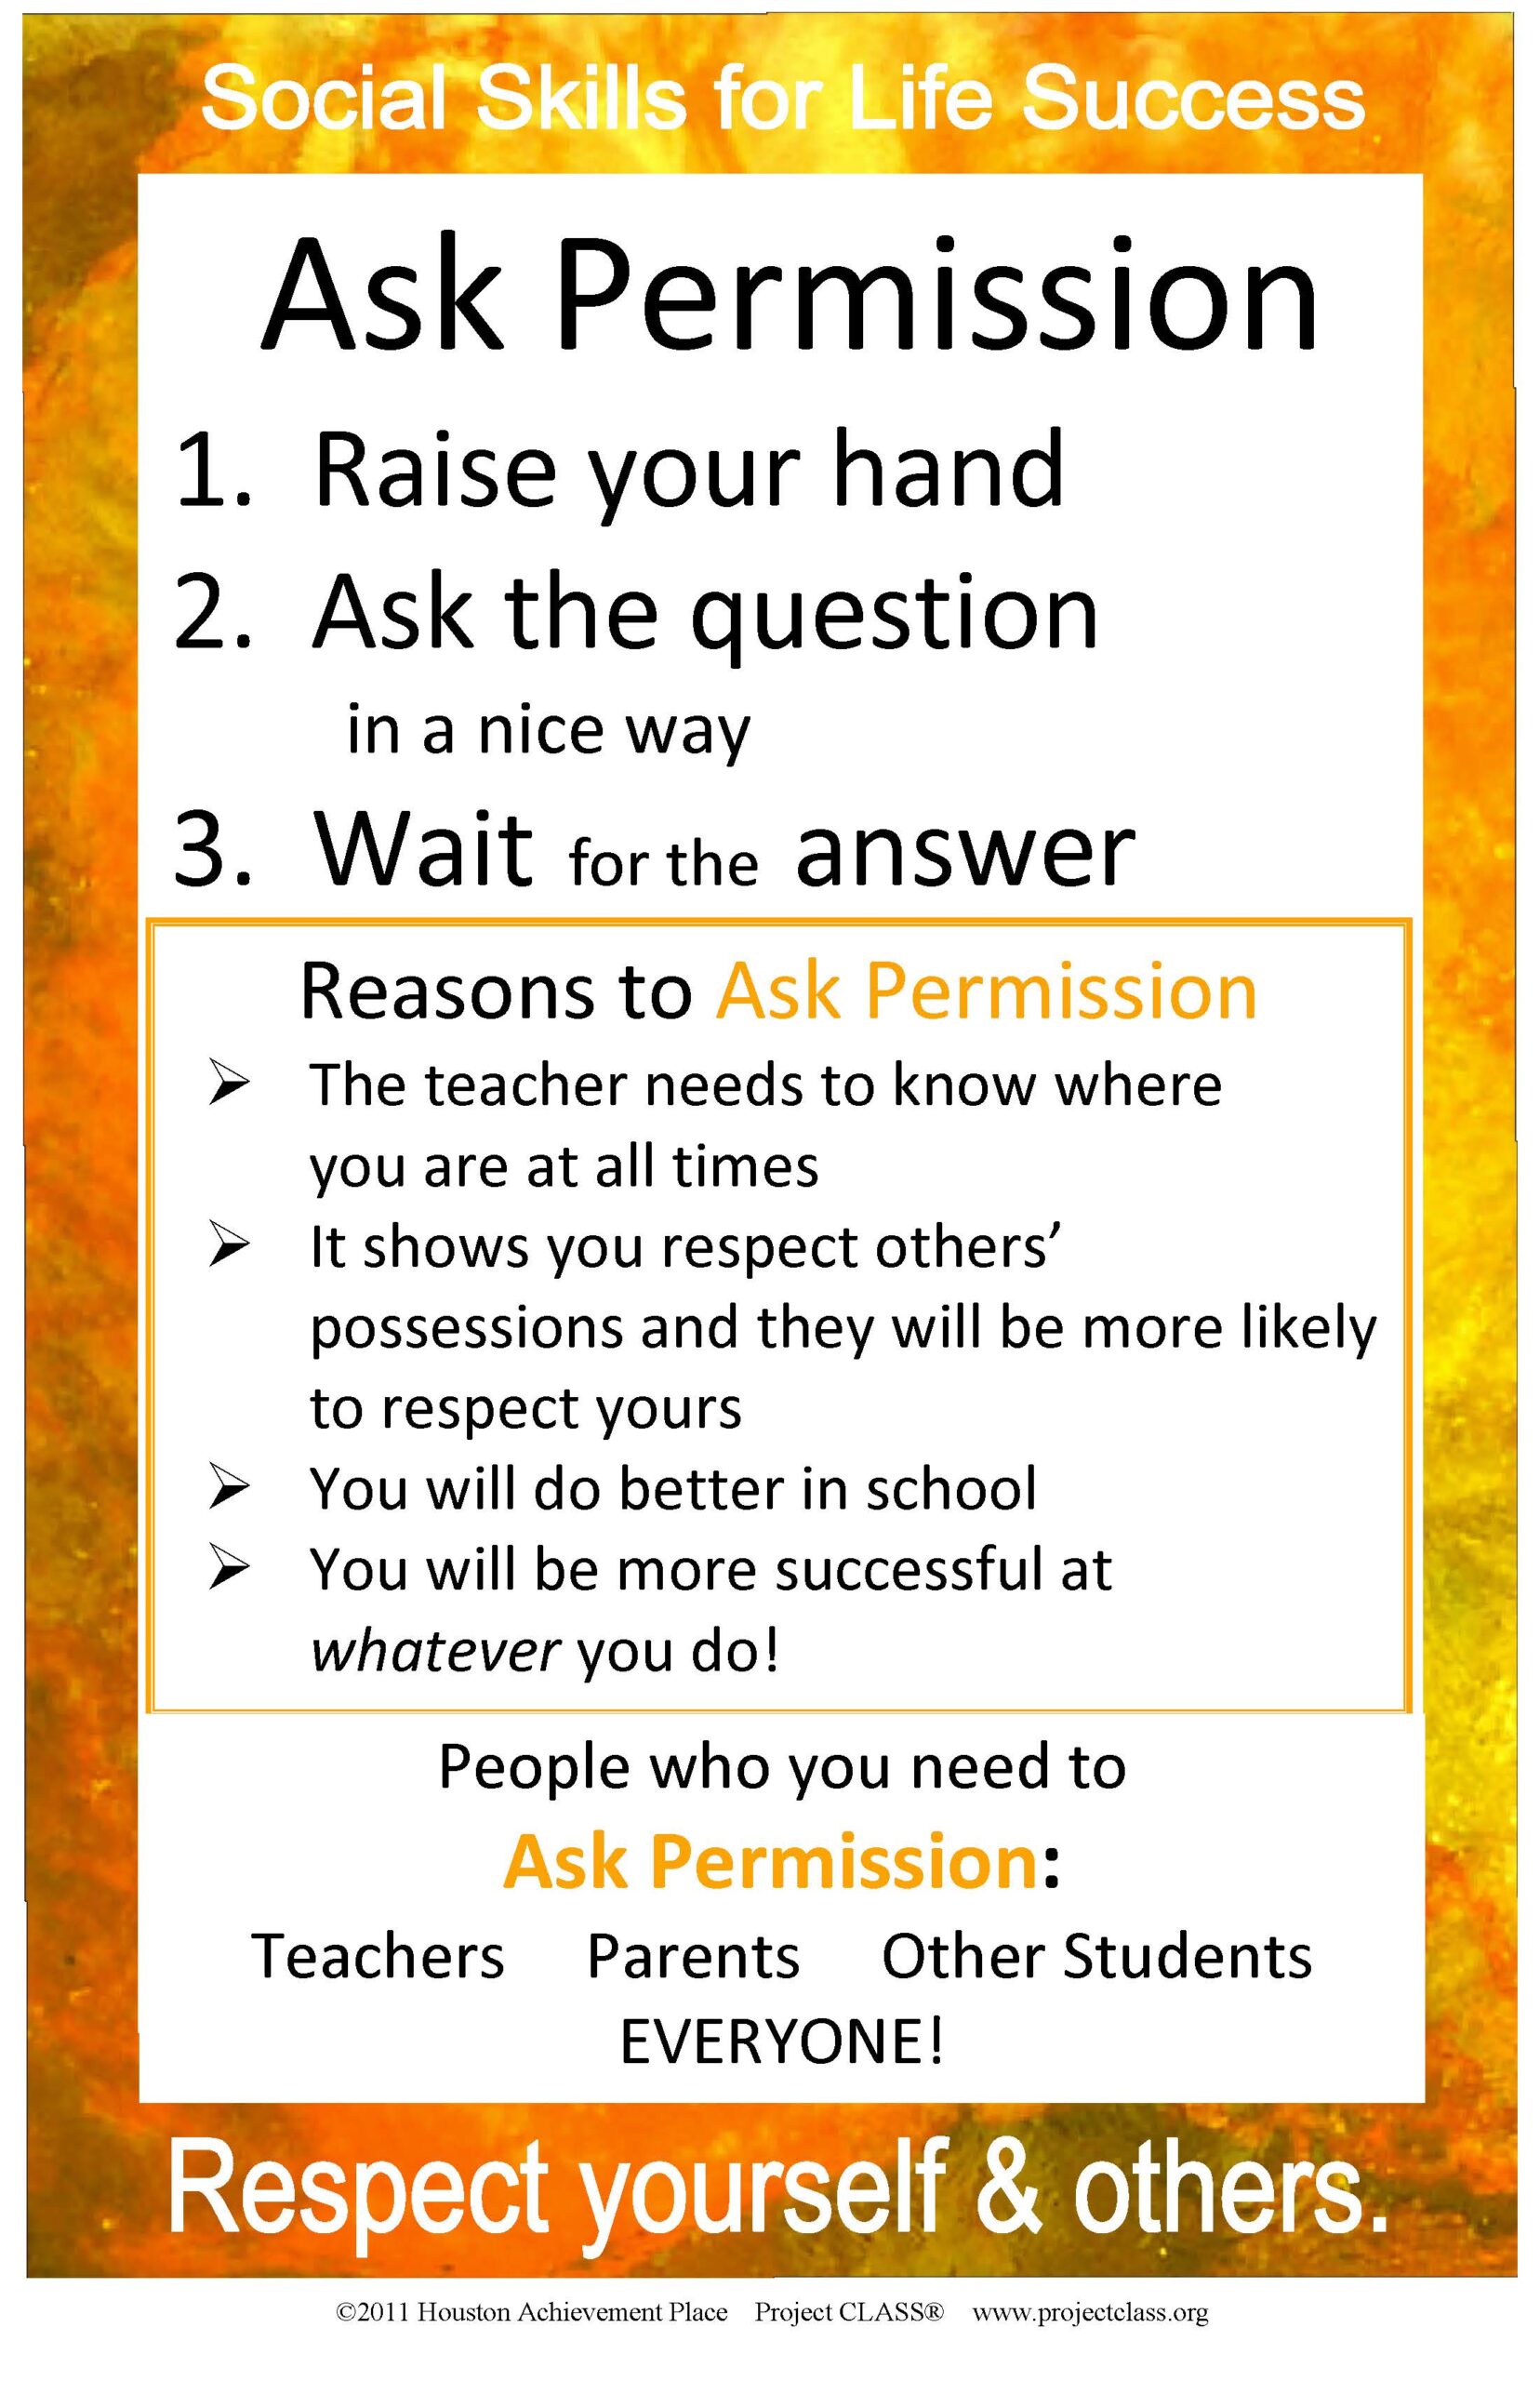 Ask Permission2011withReasons